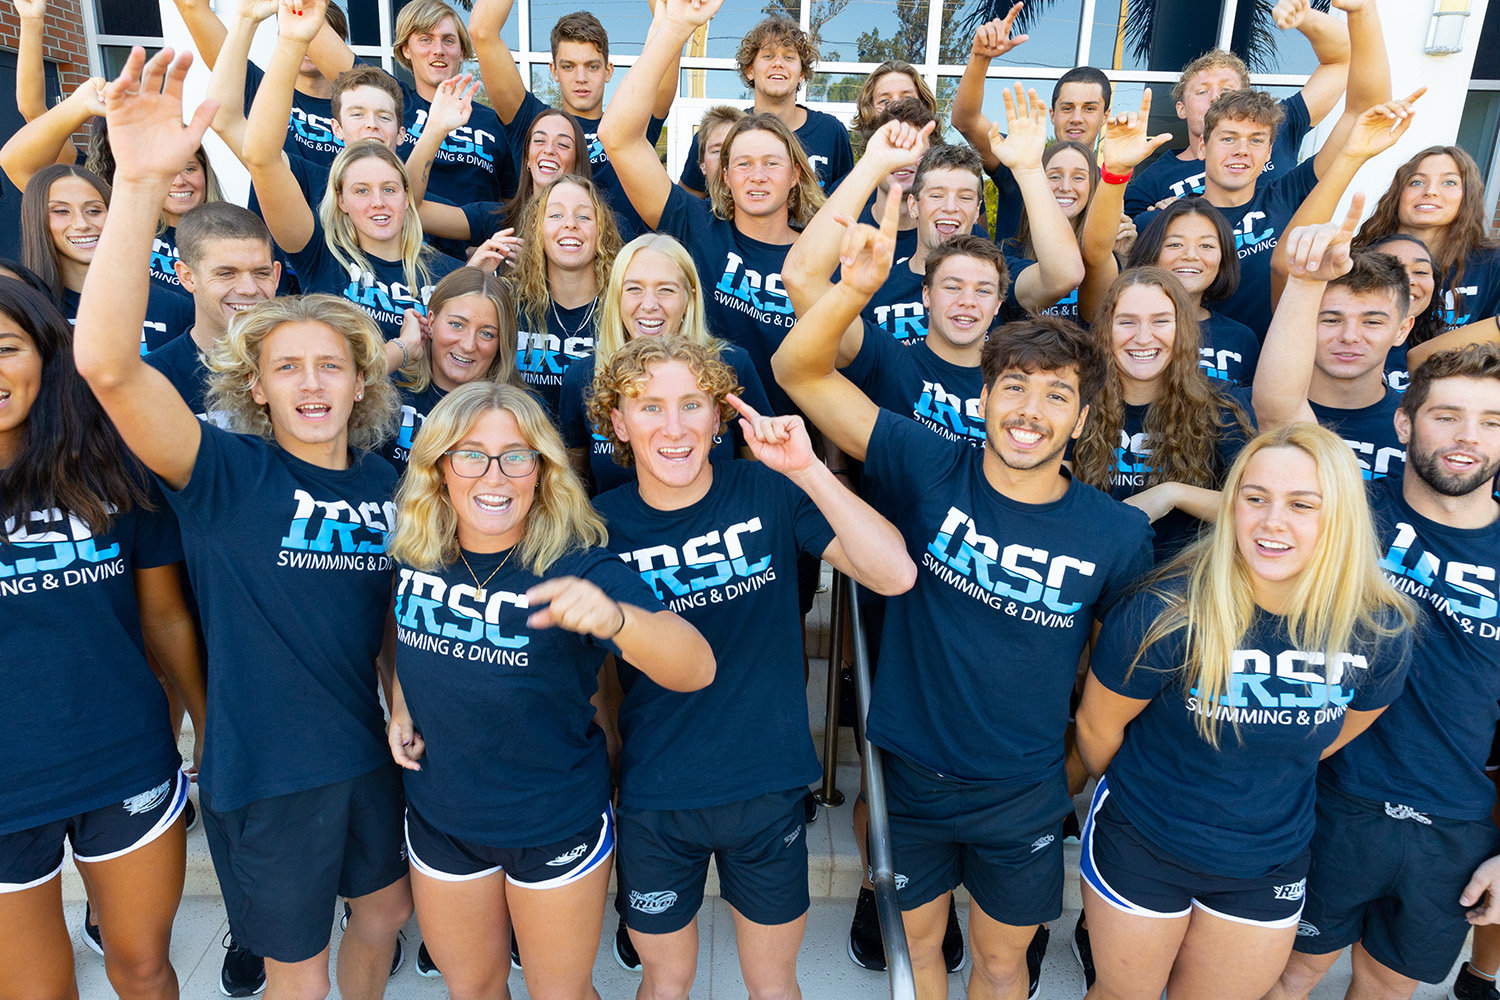 The IRSC women’s team captured their 45th overall title while the men secured an unprecedented 49th consecutive team championship at the National Junior College Athletics Association (NJCAA) Swimming and Diving National Championship.